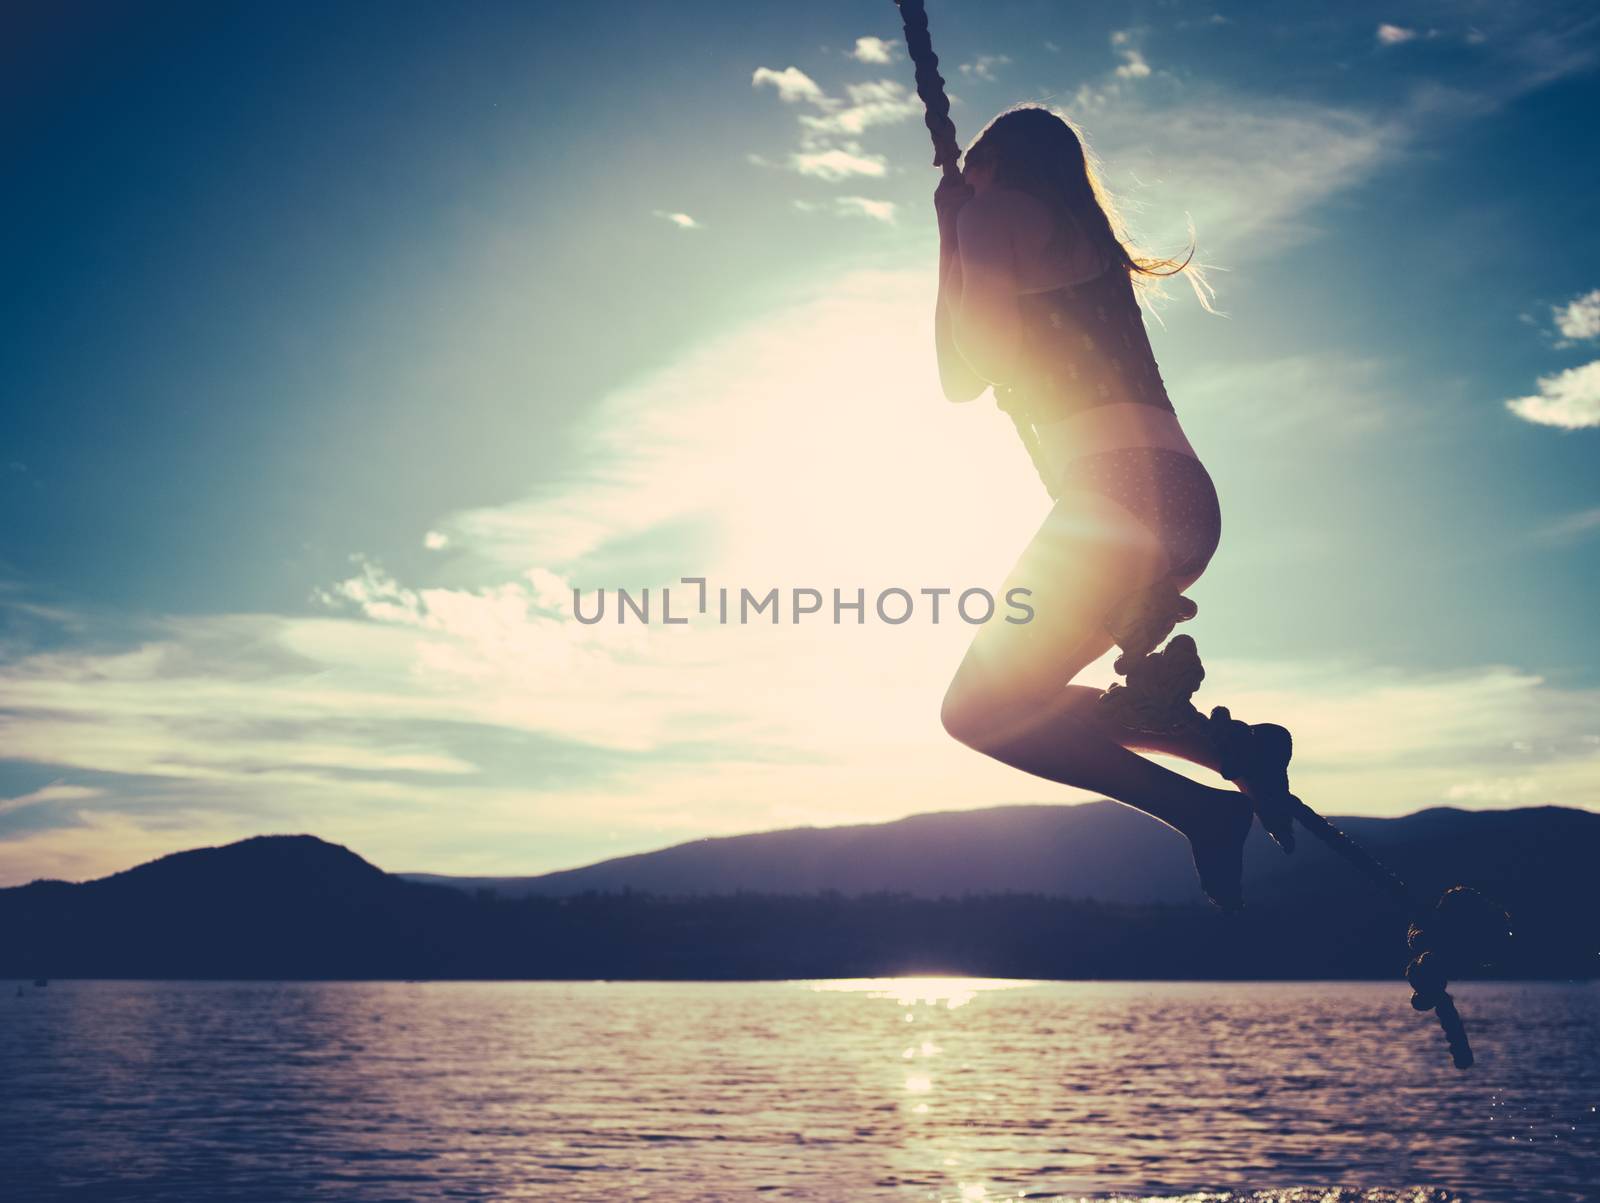 Retro Style Summertime Image Of A Girl Swinging Into A Lake At Sunset With Copy Space